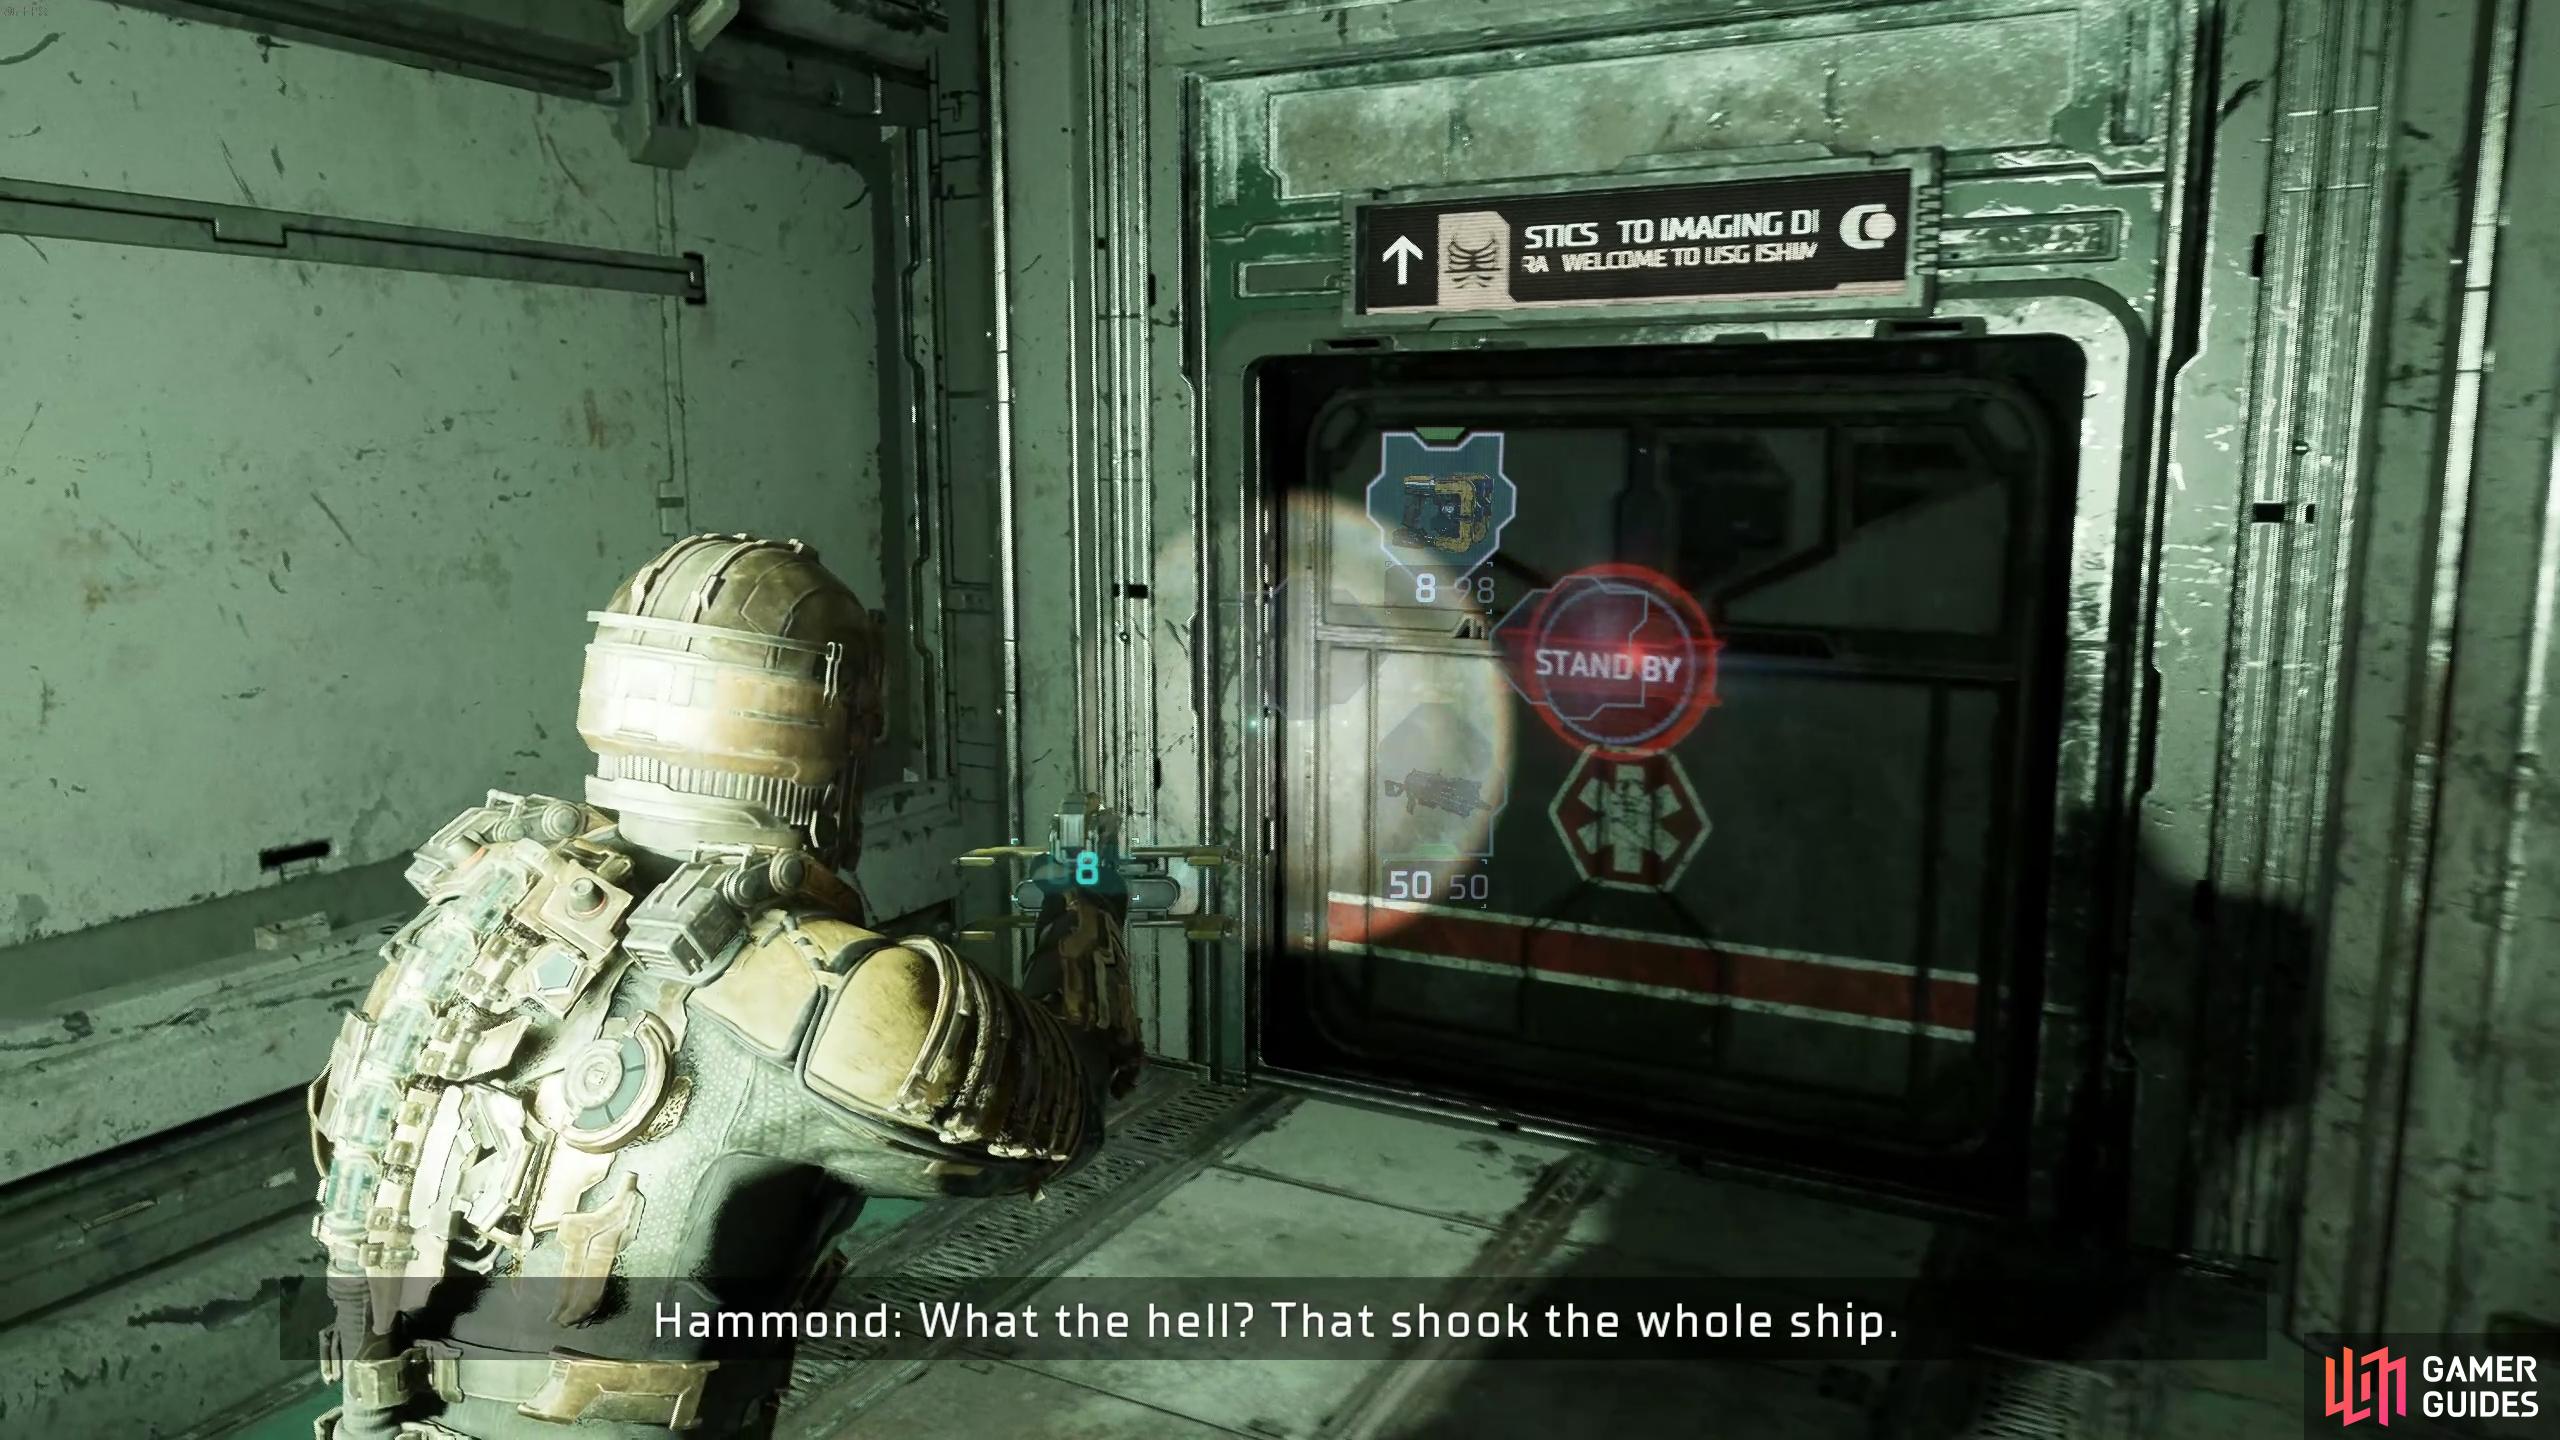 You'll acquire the Shook the Whole Ship audio log as you play through chapter 2.